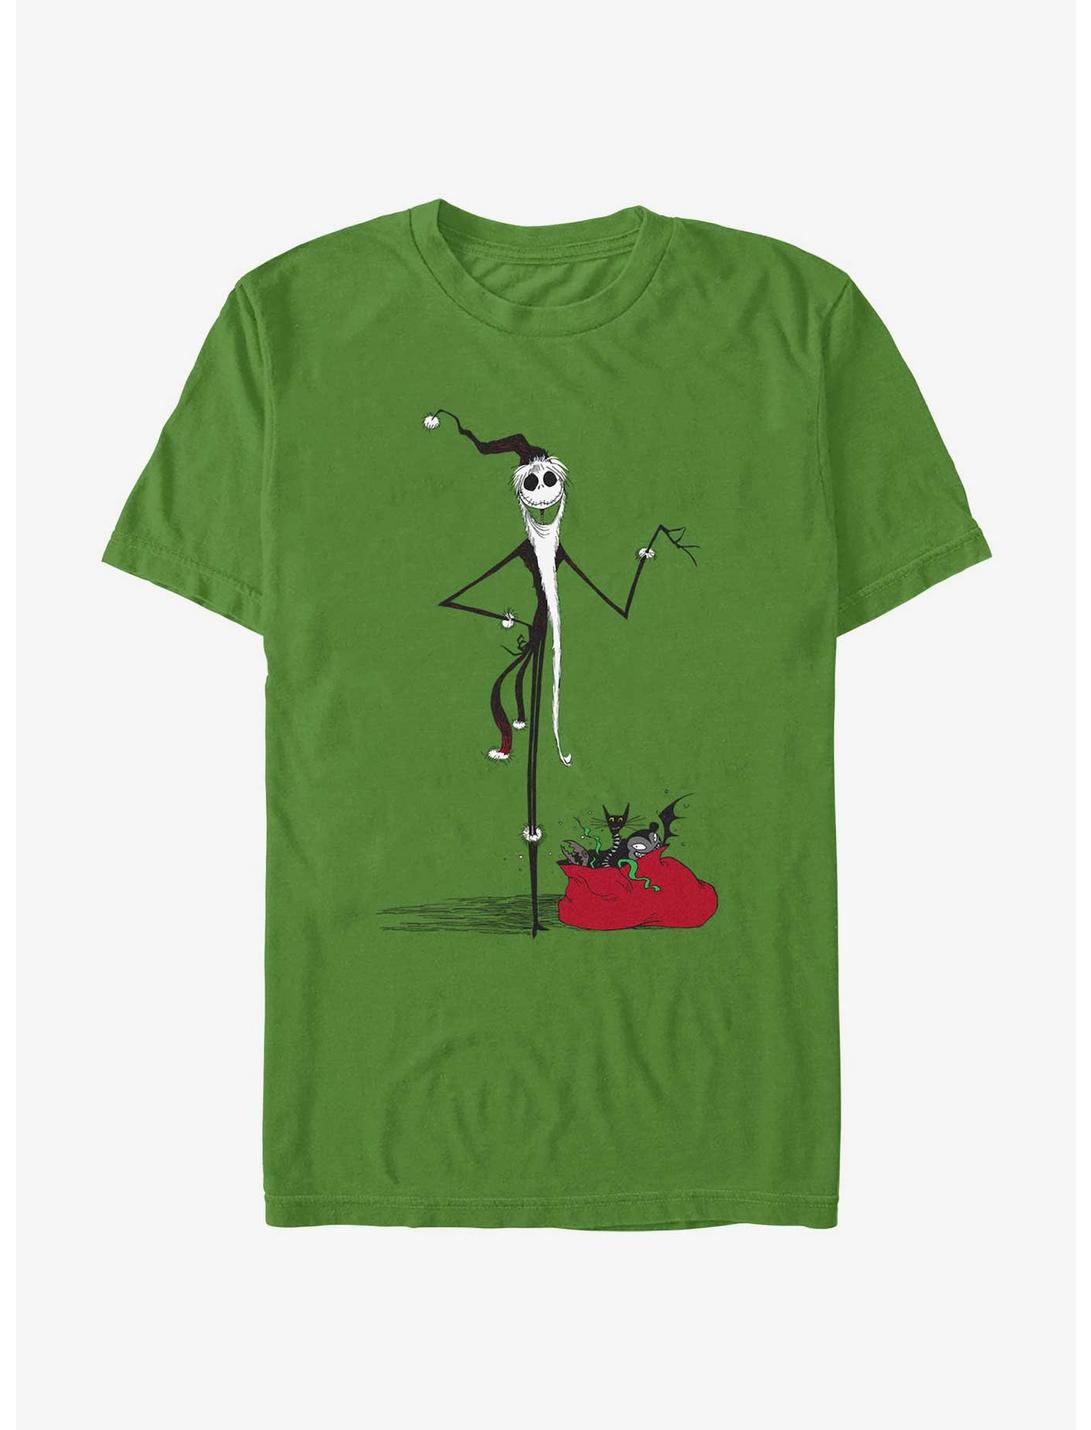 Disney The Nightmare Before Christmas Sandy Claws Jack T-Shirt, KELLY, hi-res